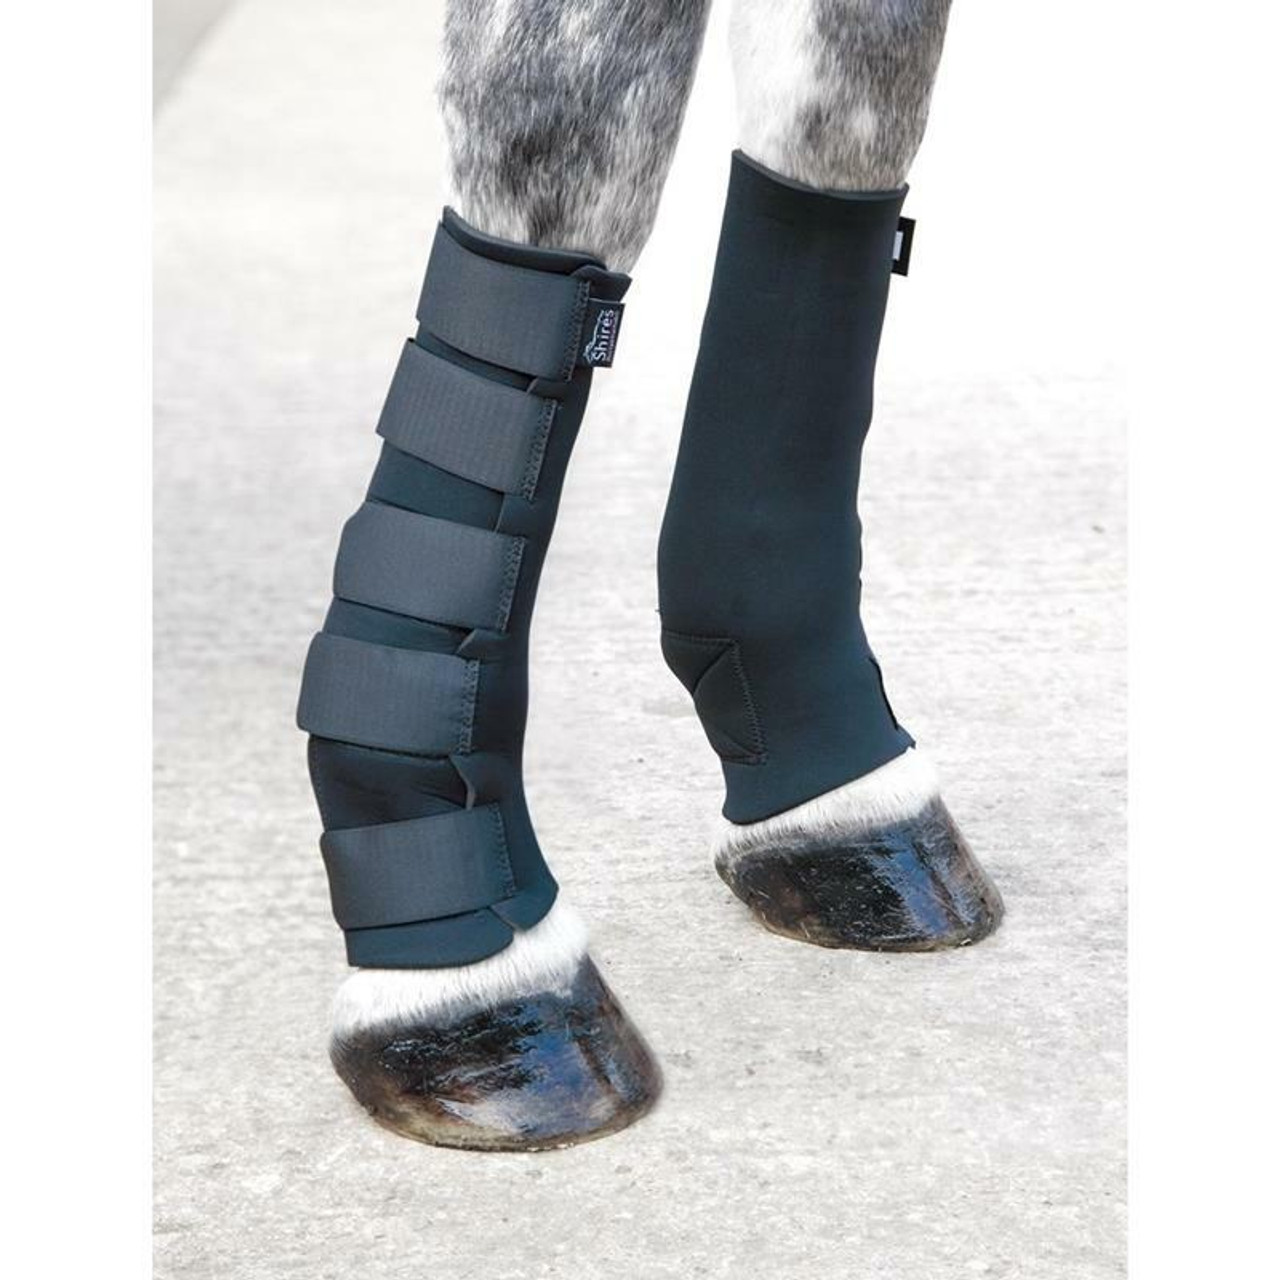 Shires Airflow Fly Turnout Socks